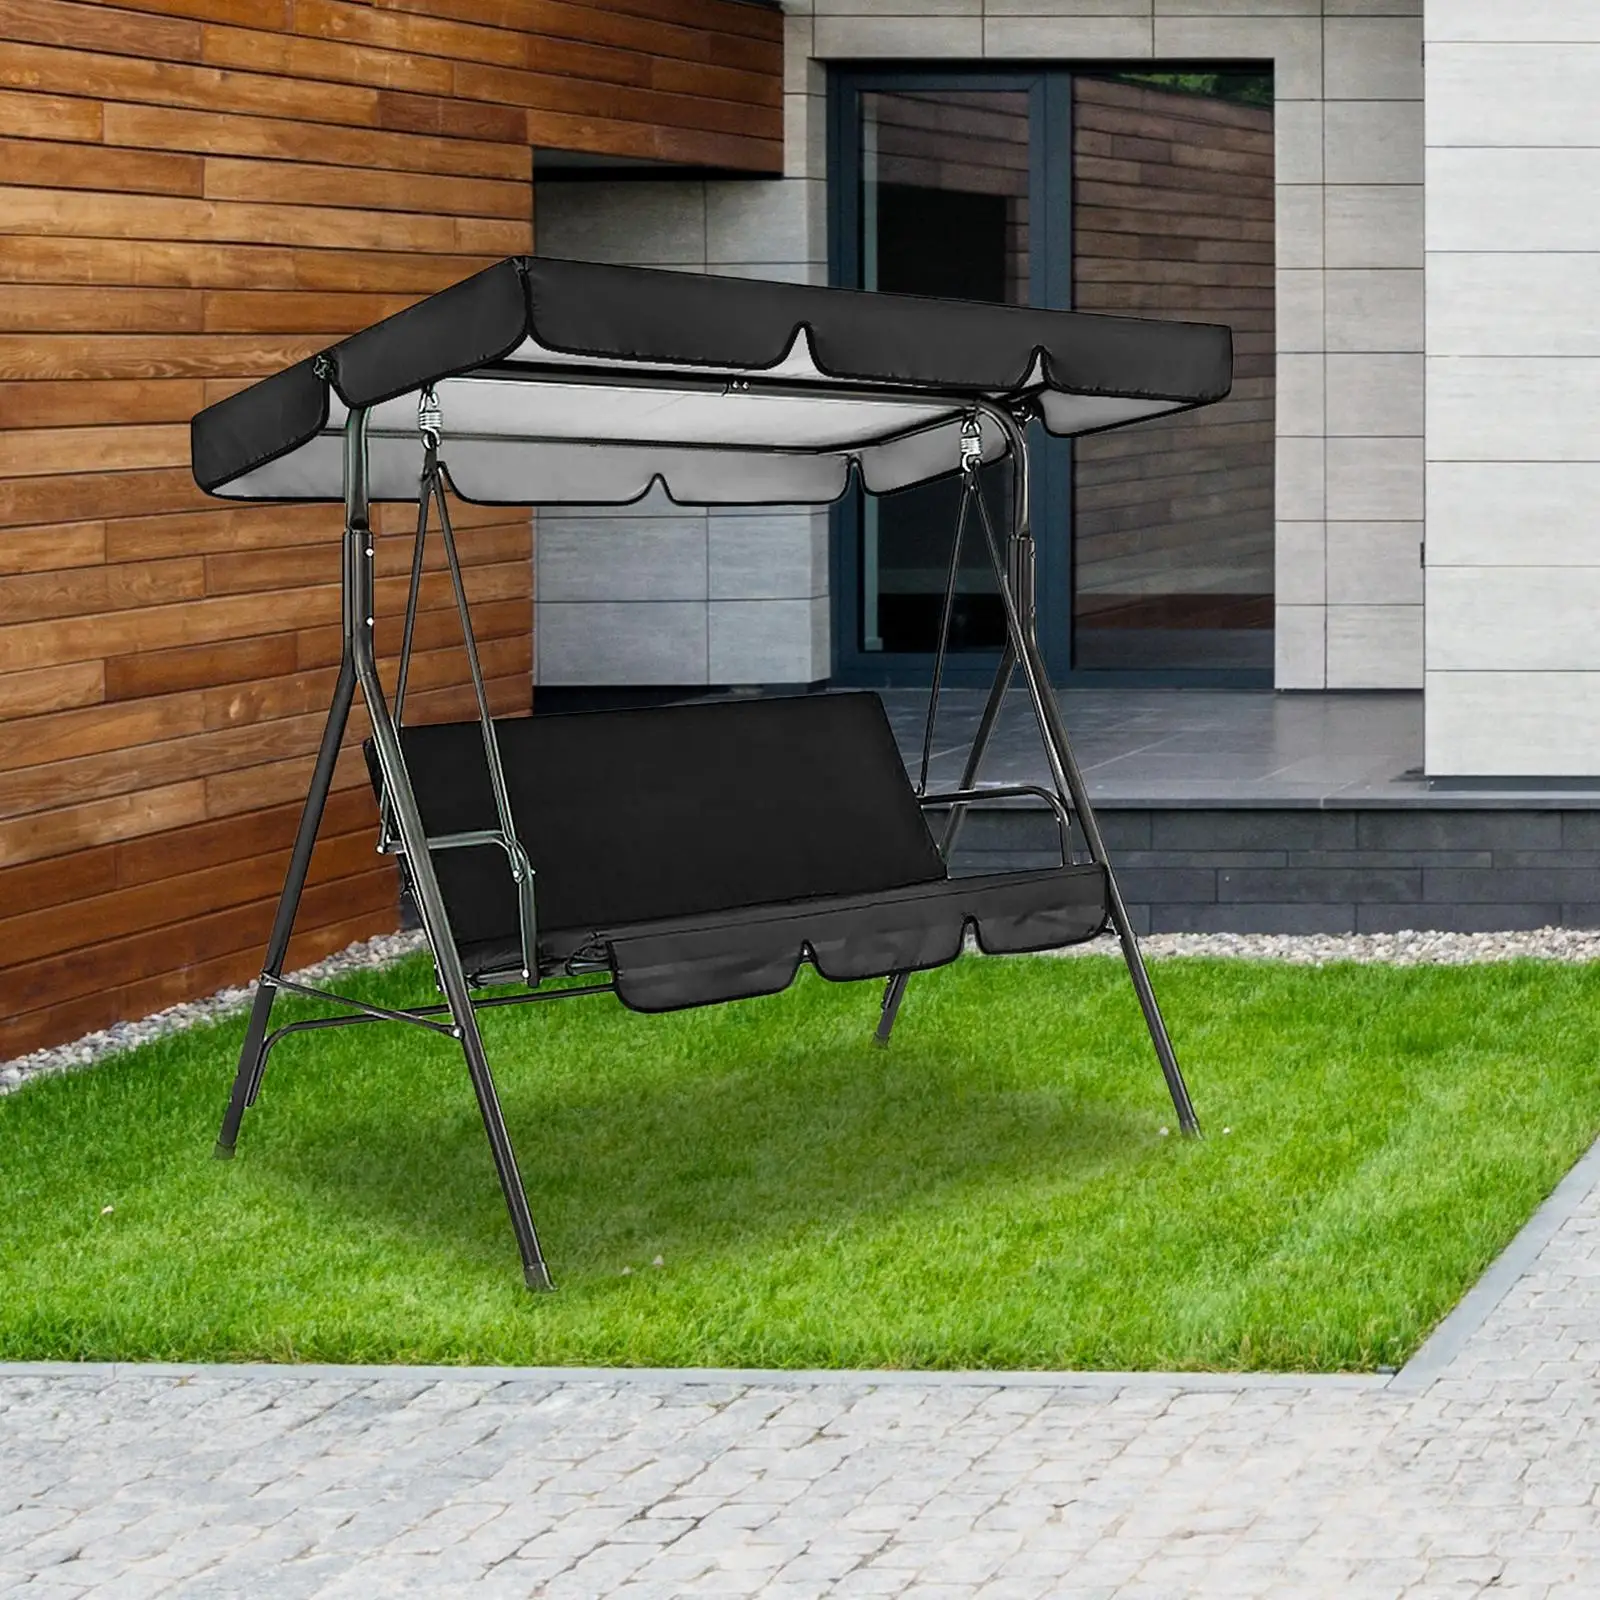 Patio Swing Canopy Replacement Rain Cover Windproof Dustproof Garden Swing Chair Cover for Swing Furniture Porch Seat Patio